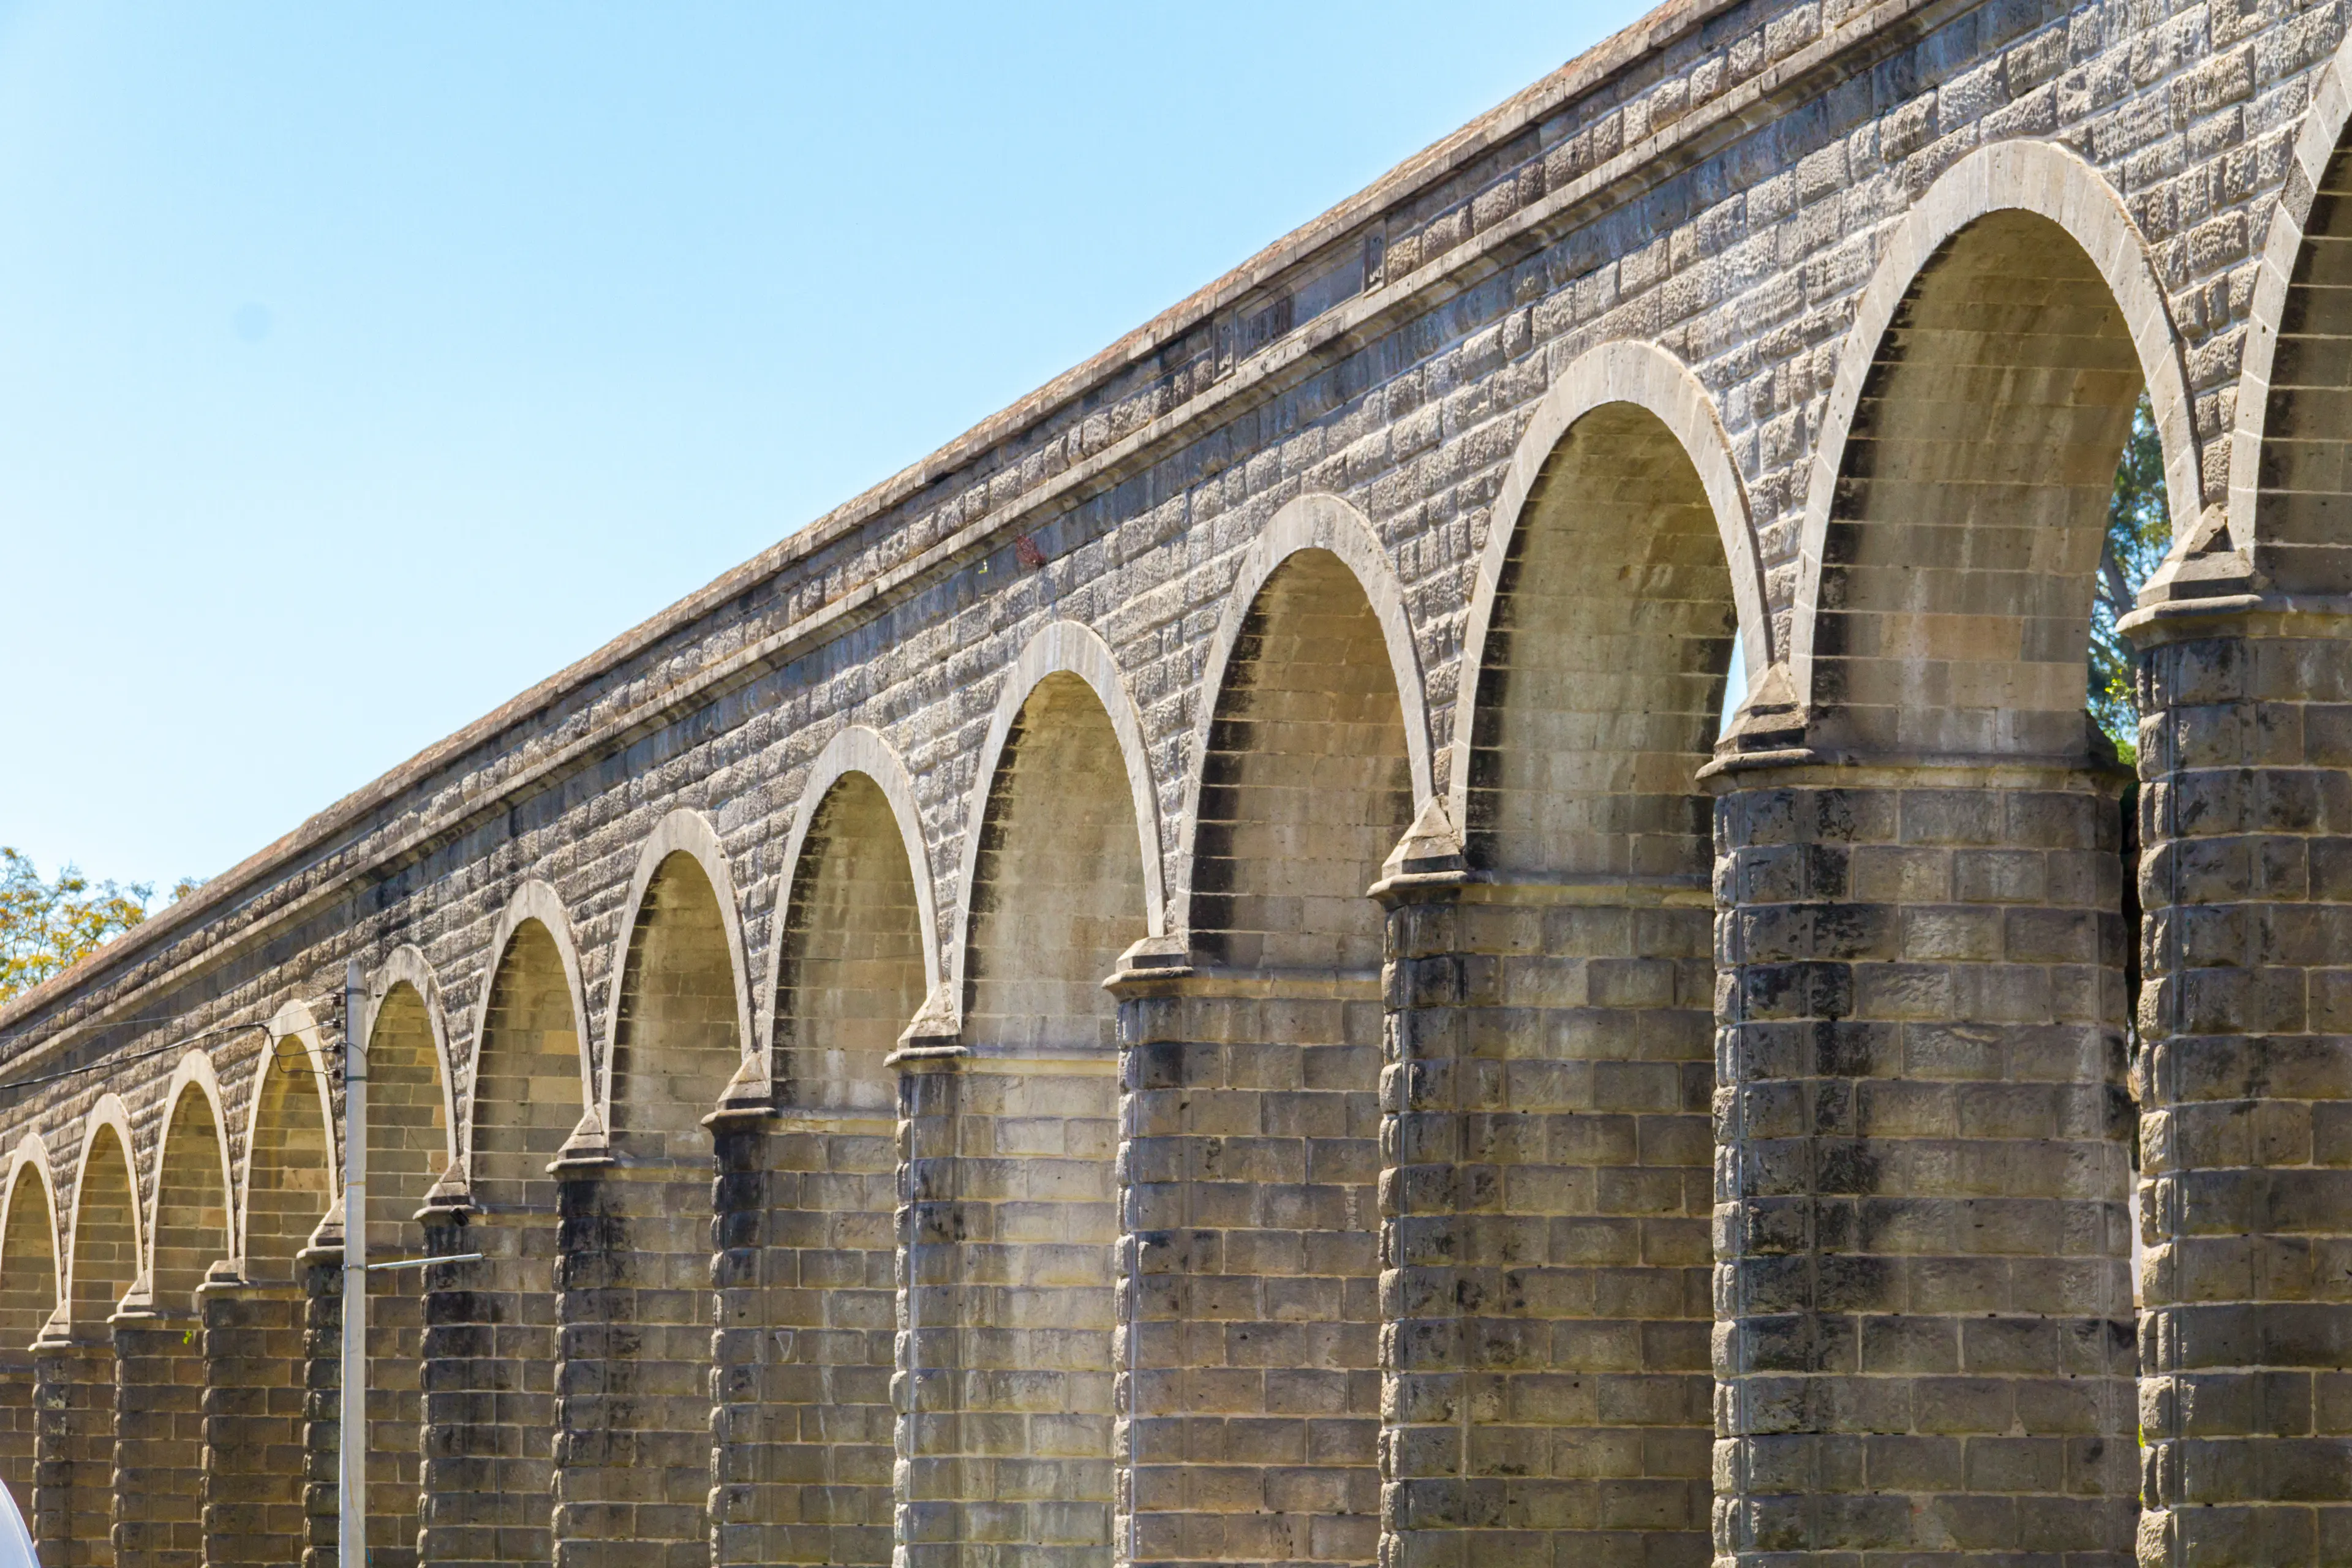 Arches of the old aqueduct